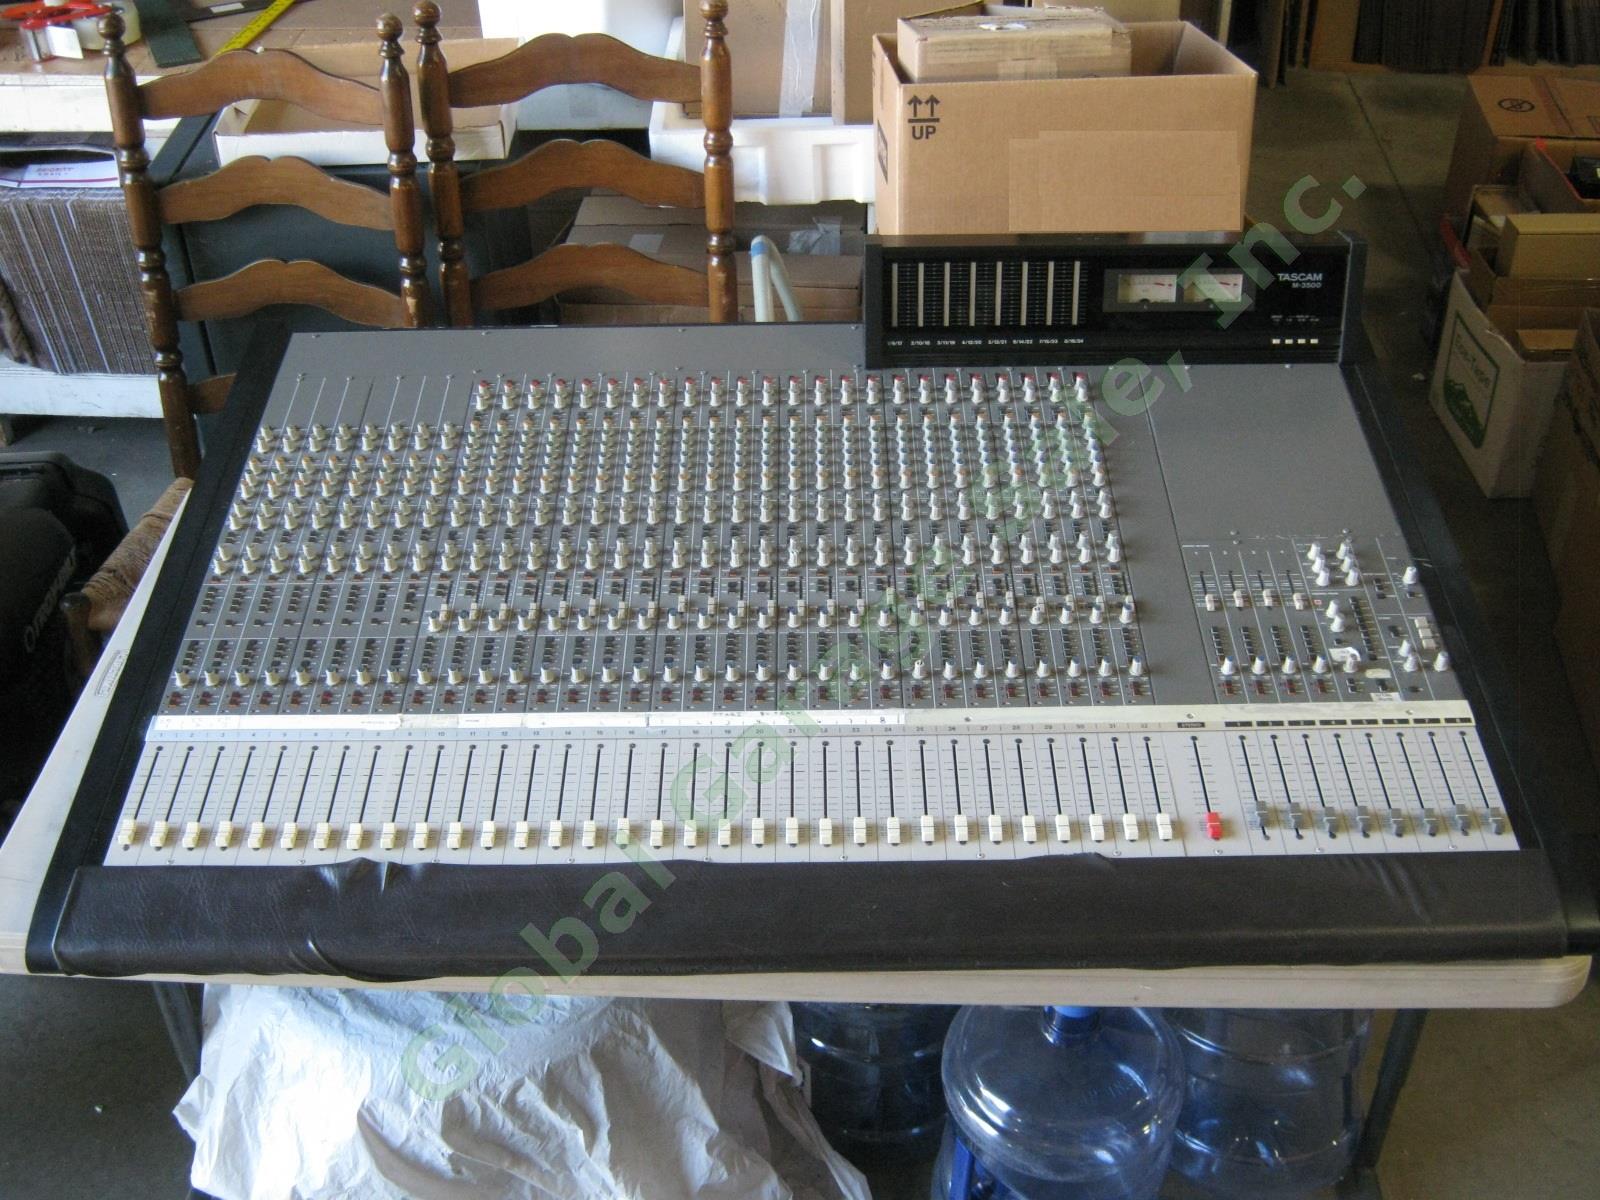 Tascam M-3500 24-Track Analog Radio Station Mixer Mixing Board 4 Pickup/Delivery